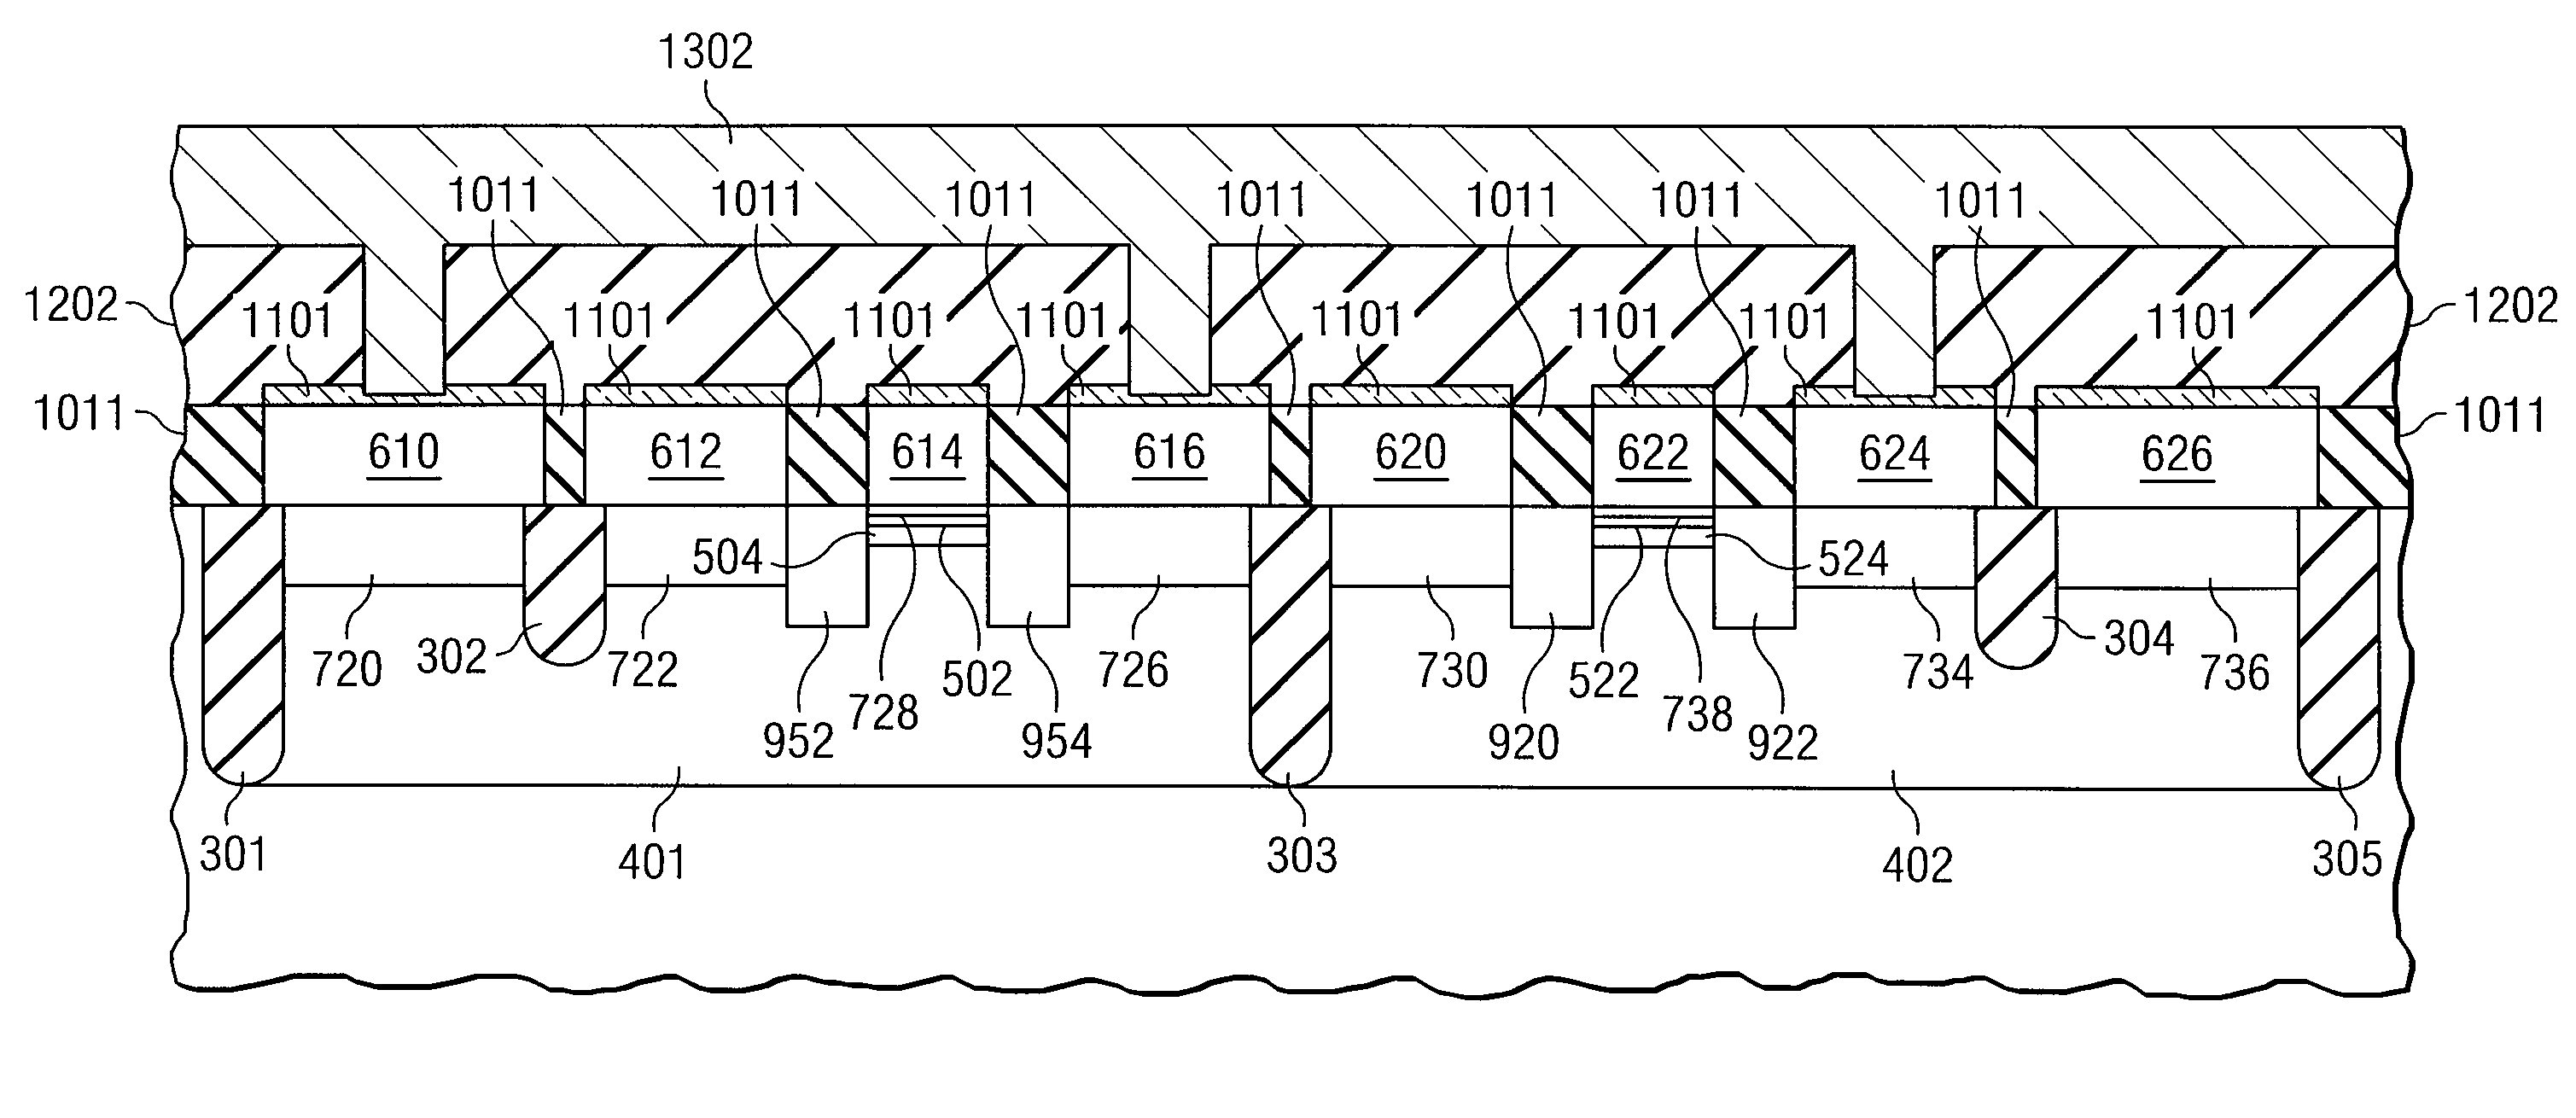 JFET Having a Step Channel Doping Profile and Method of Fabrication